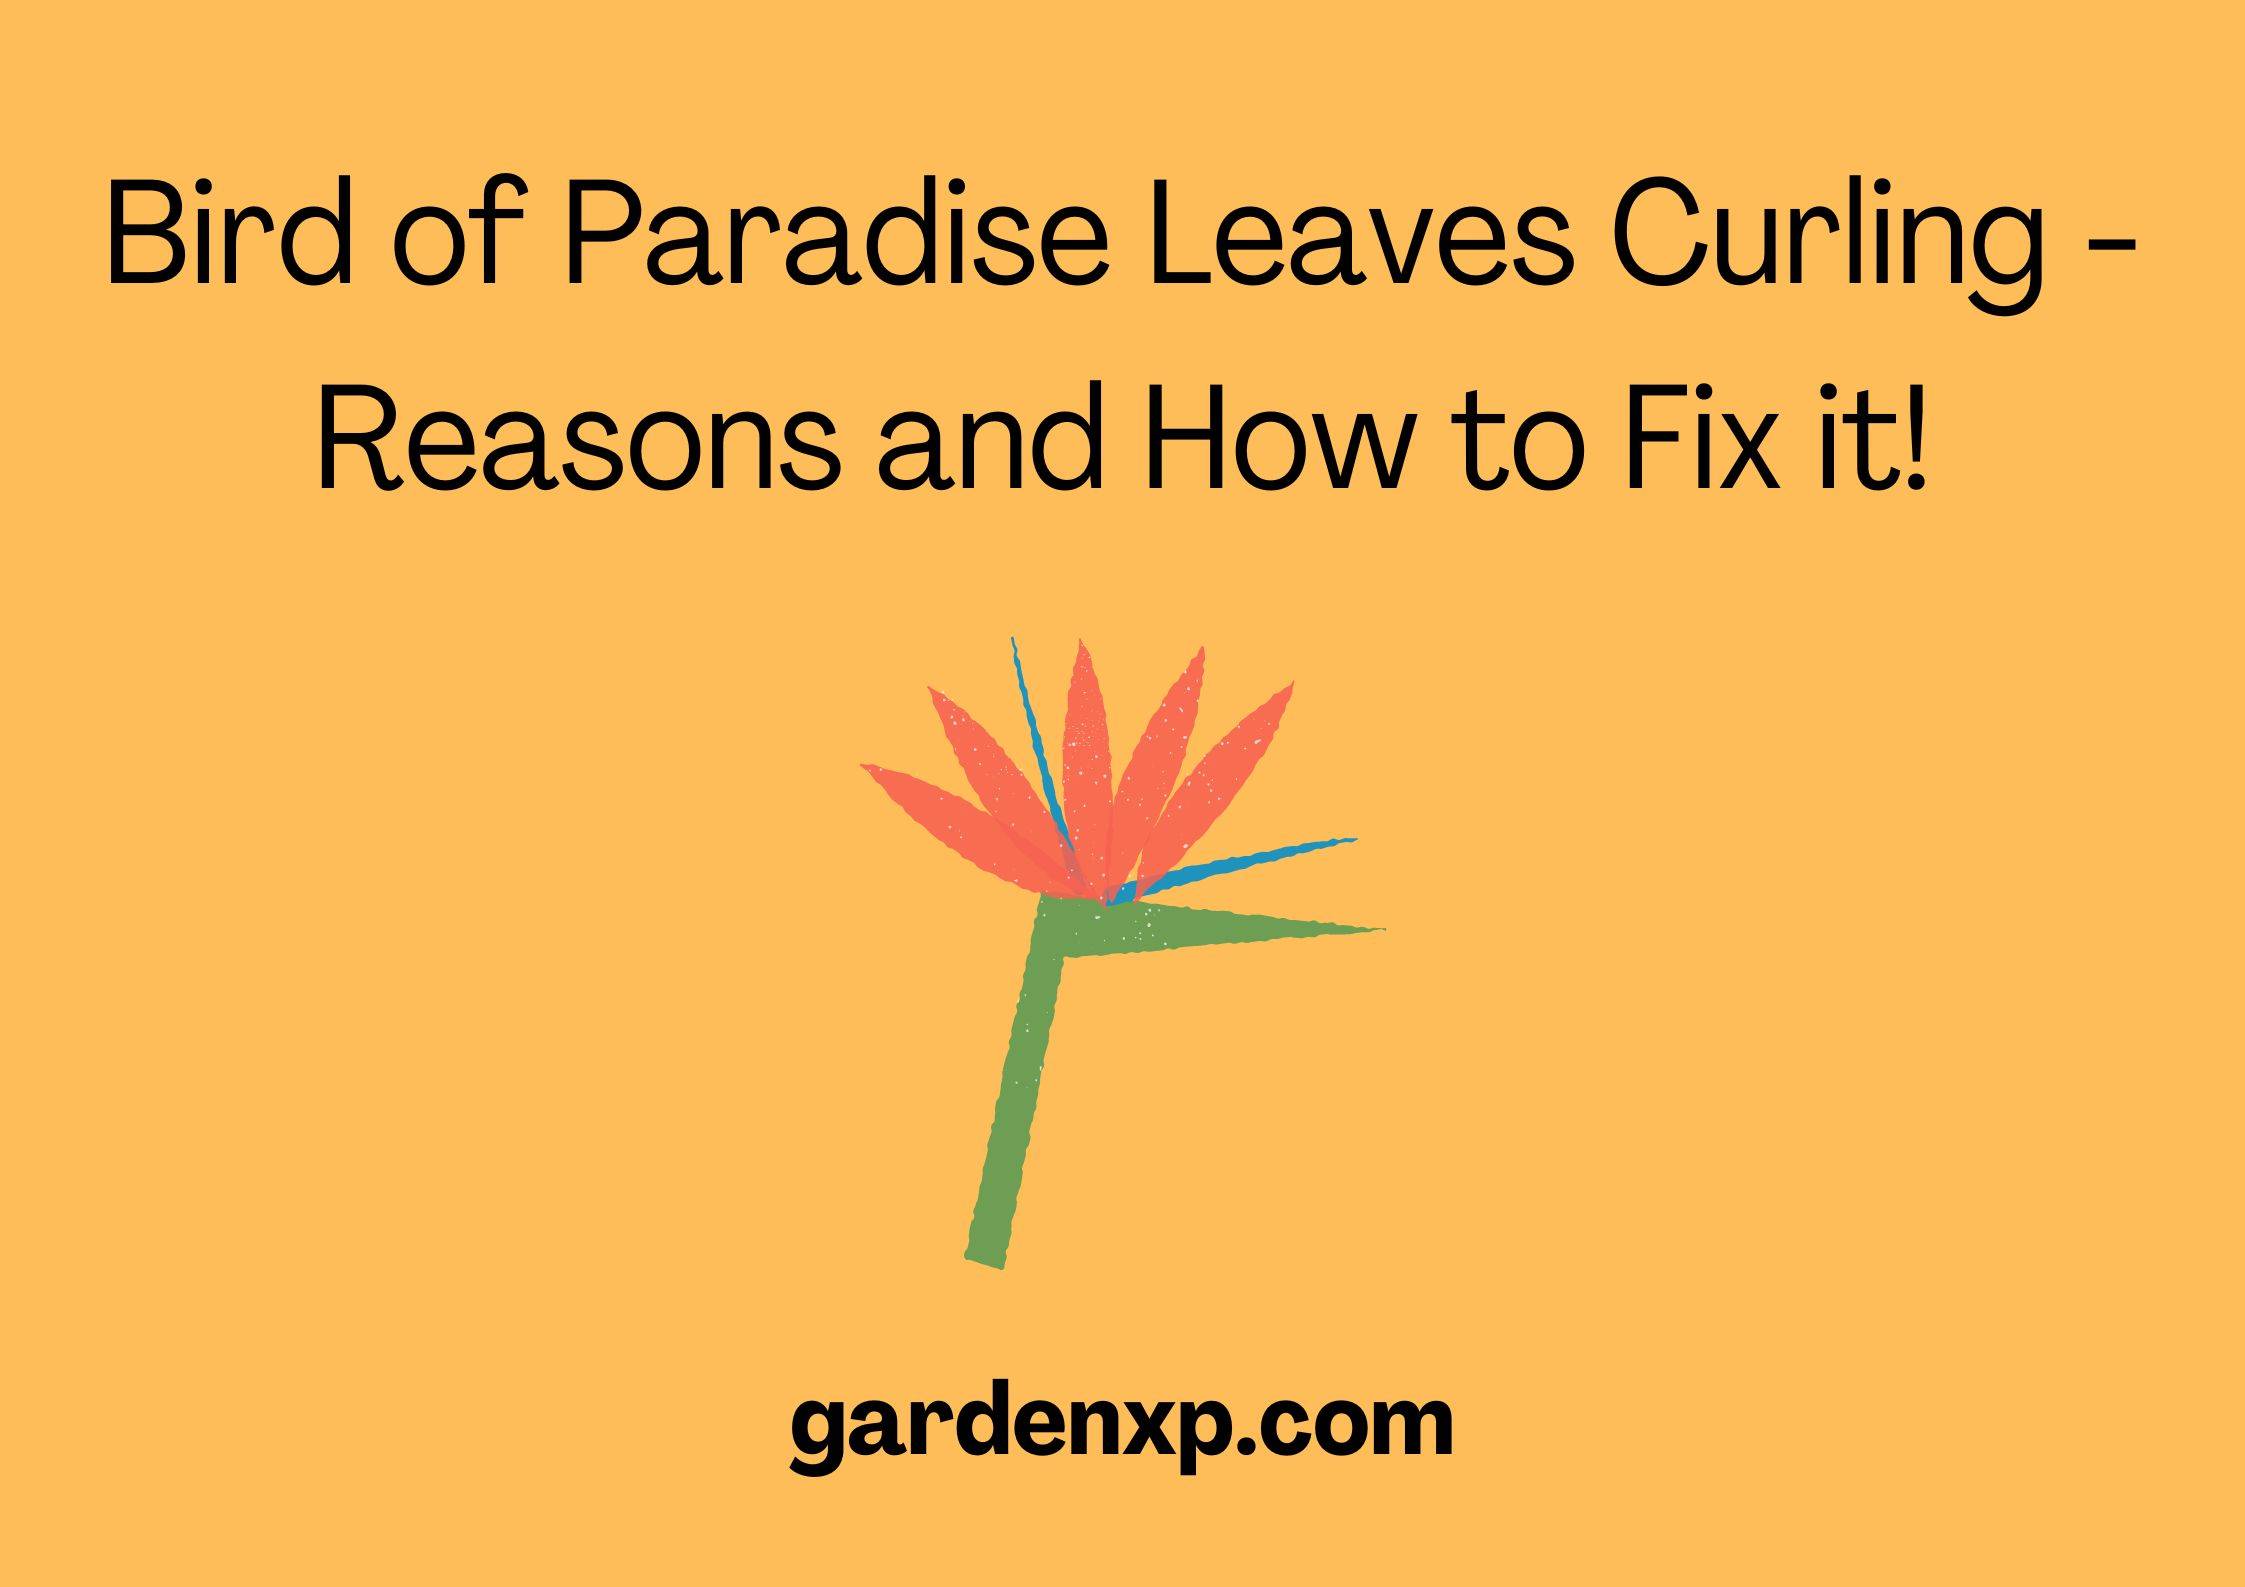 Bird of Paradise Leaves Curling - Reasons and How to Fix it!